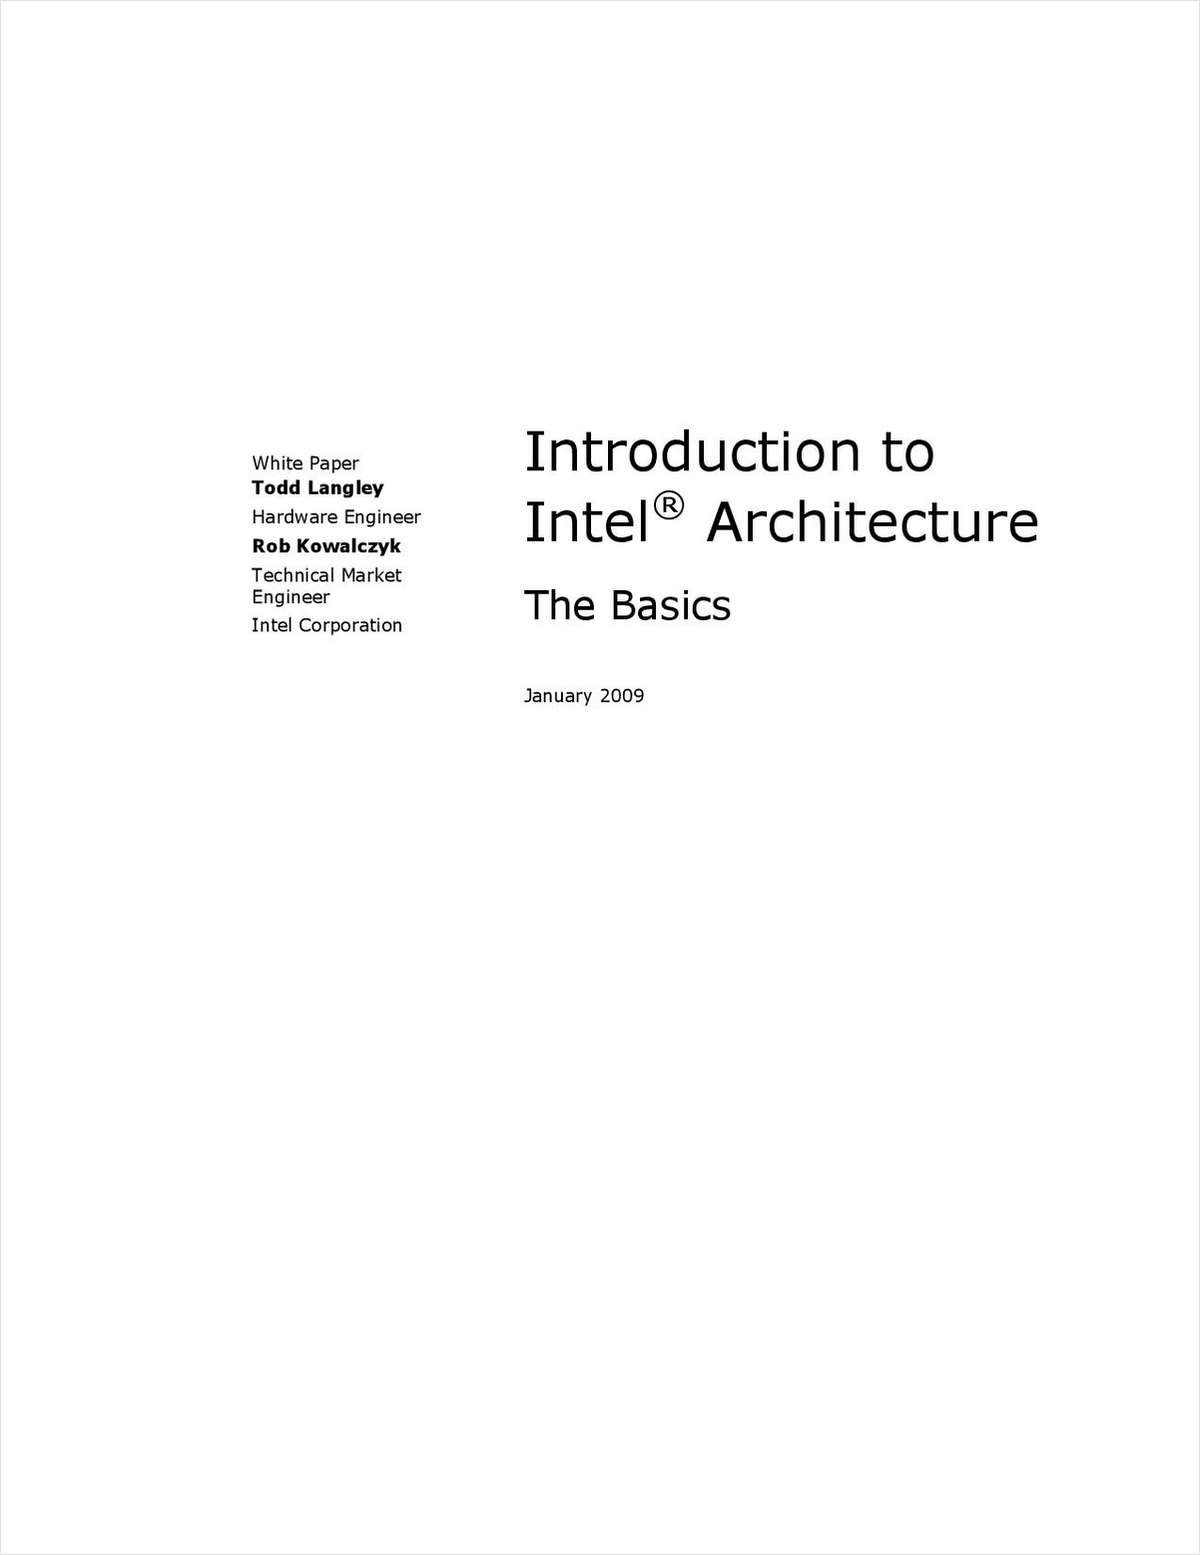 An Introduction to Intel® Architecture: The Basics